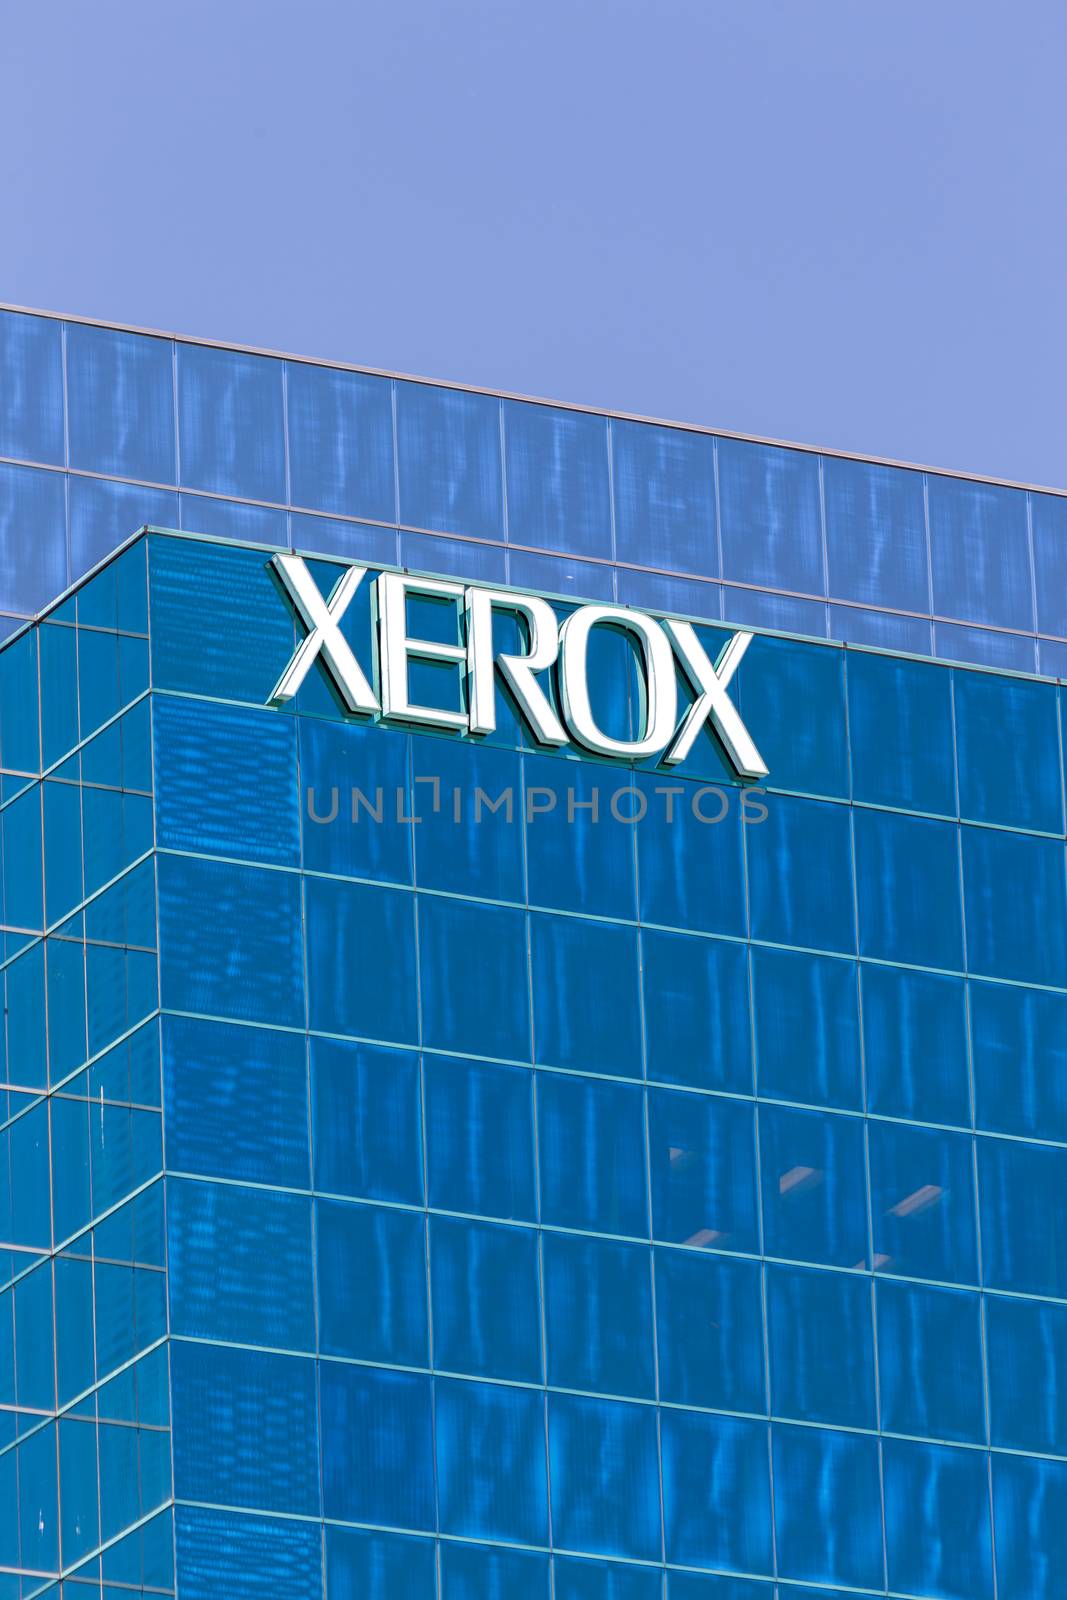 Xerox Corporate Headquarters by wolterk